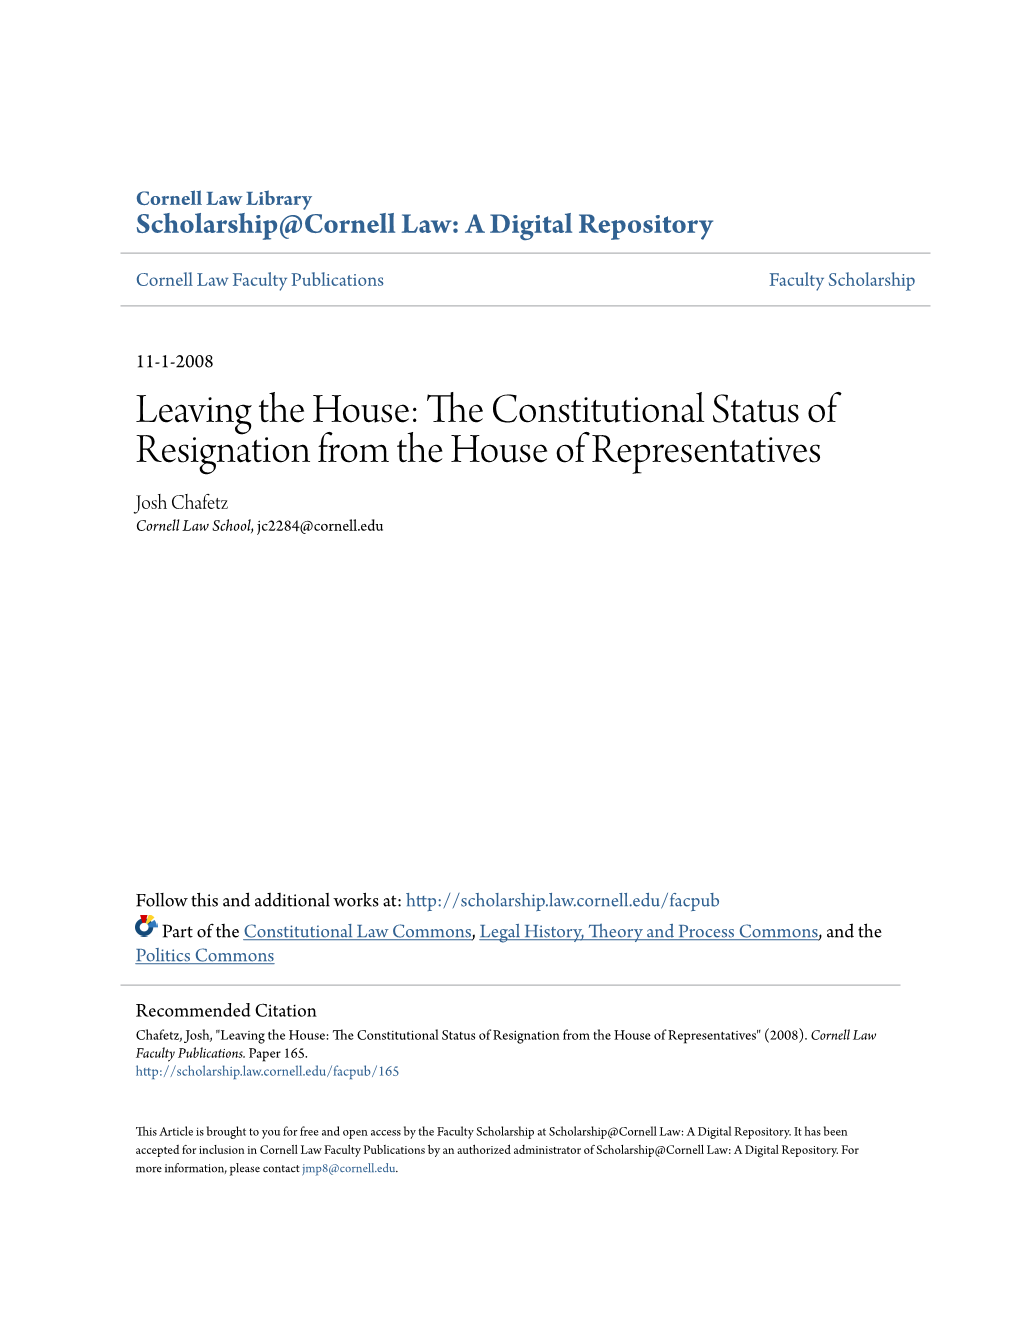 Leaving the House: the Constitutional Status of Resignation from the House of Representatives